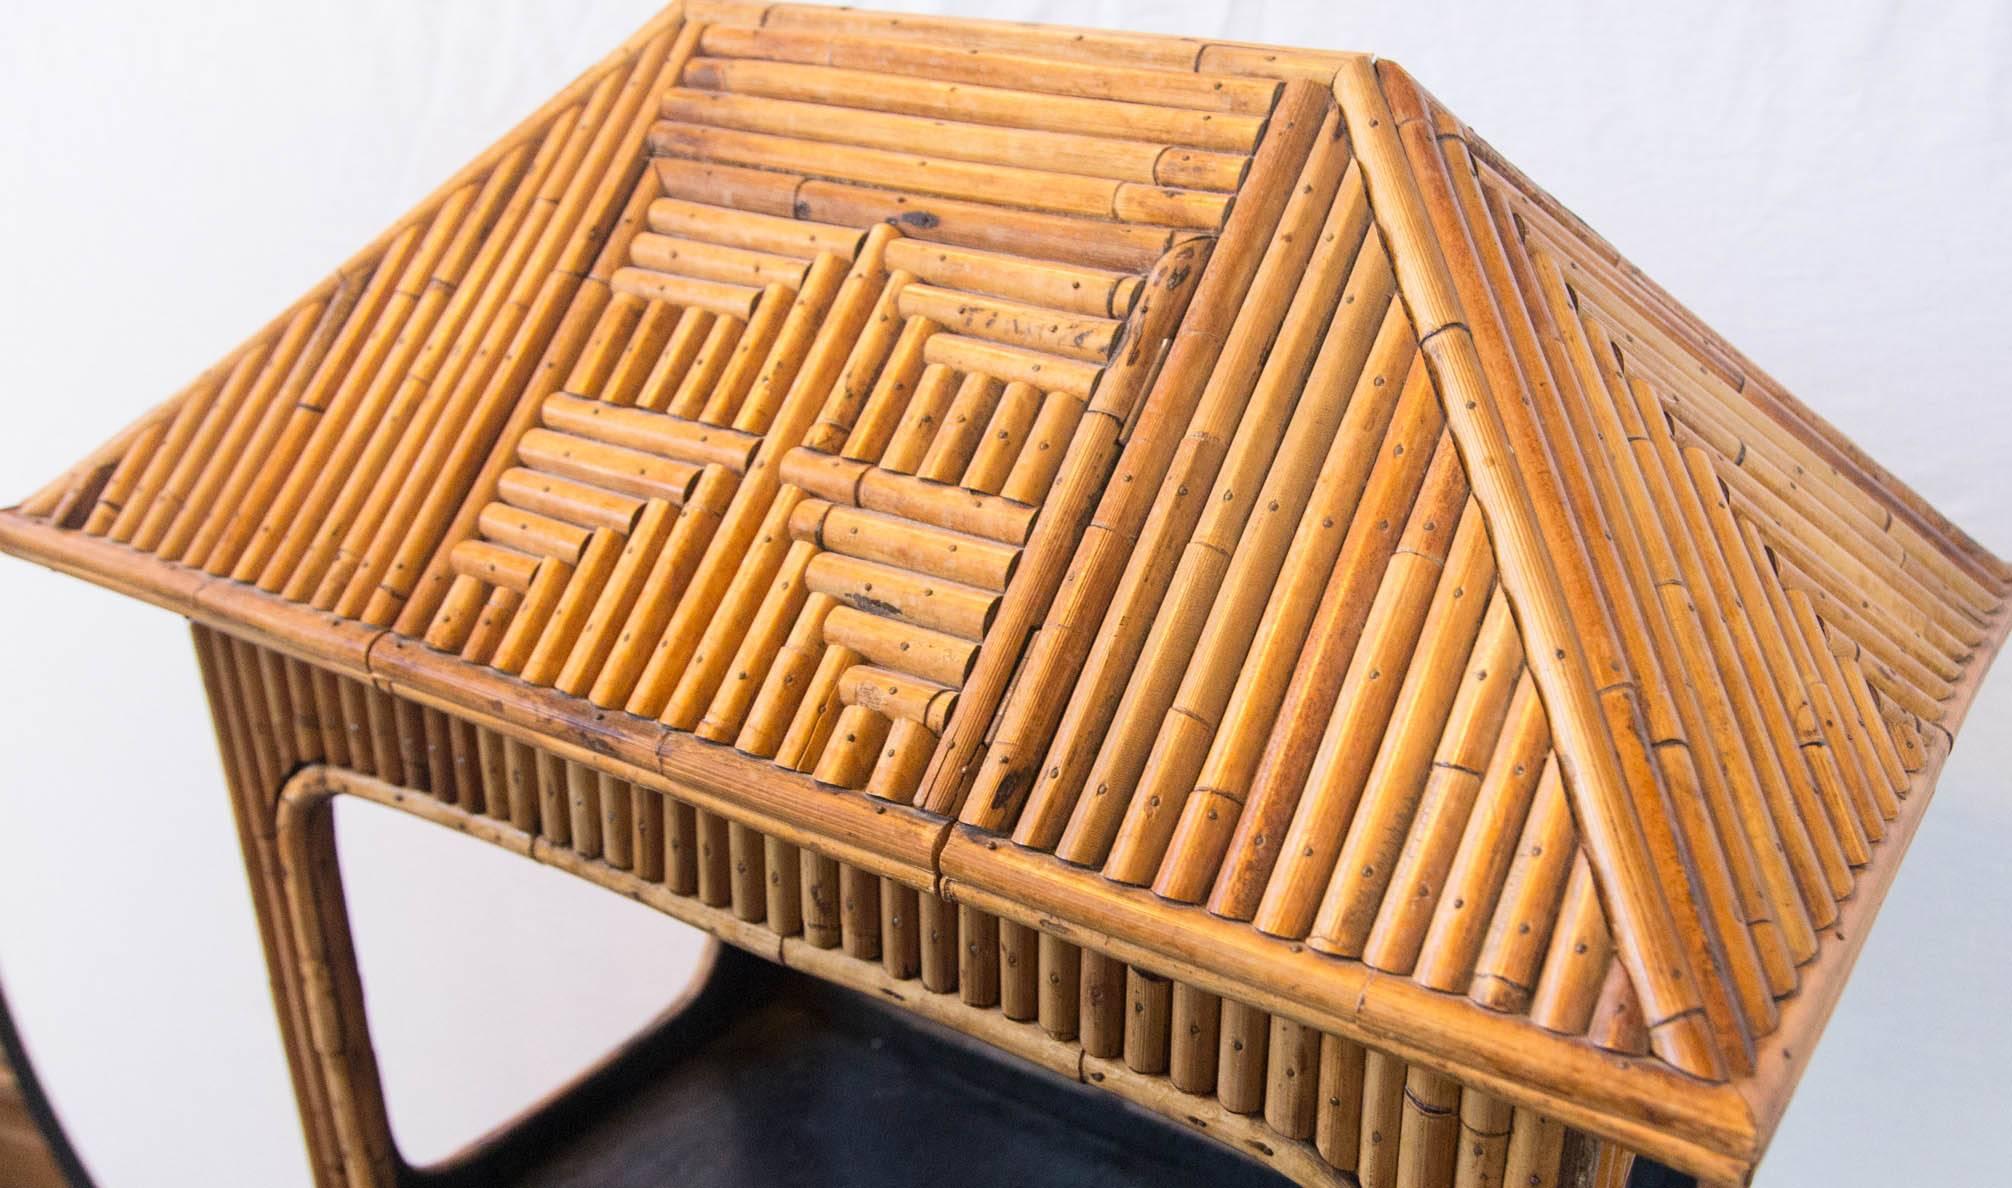 Rattan étagère or dry bar with drawer. Body is 25 wide, 15.5 deep. It is in three pieces. A unique piece with nicely detailed bamboo work. Use your imagination!